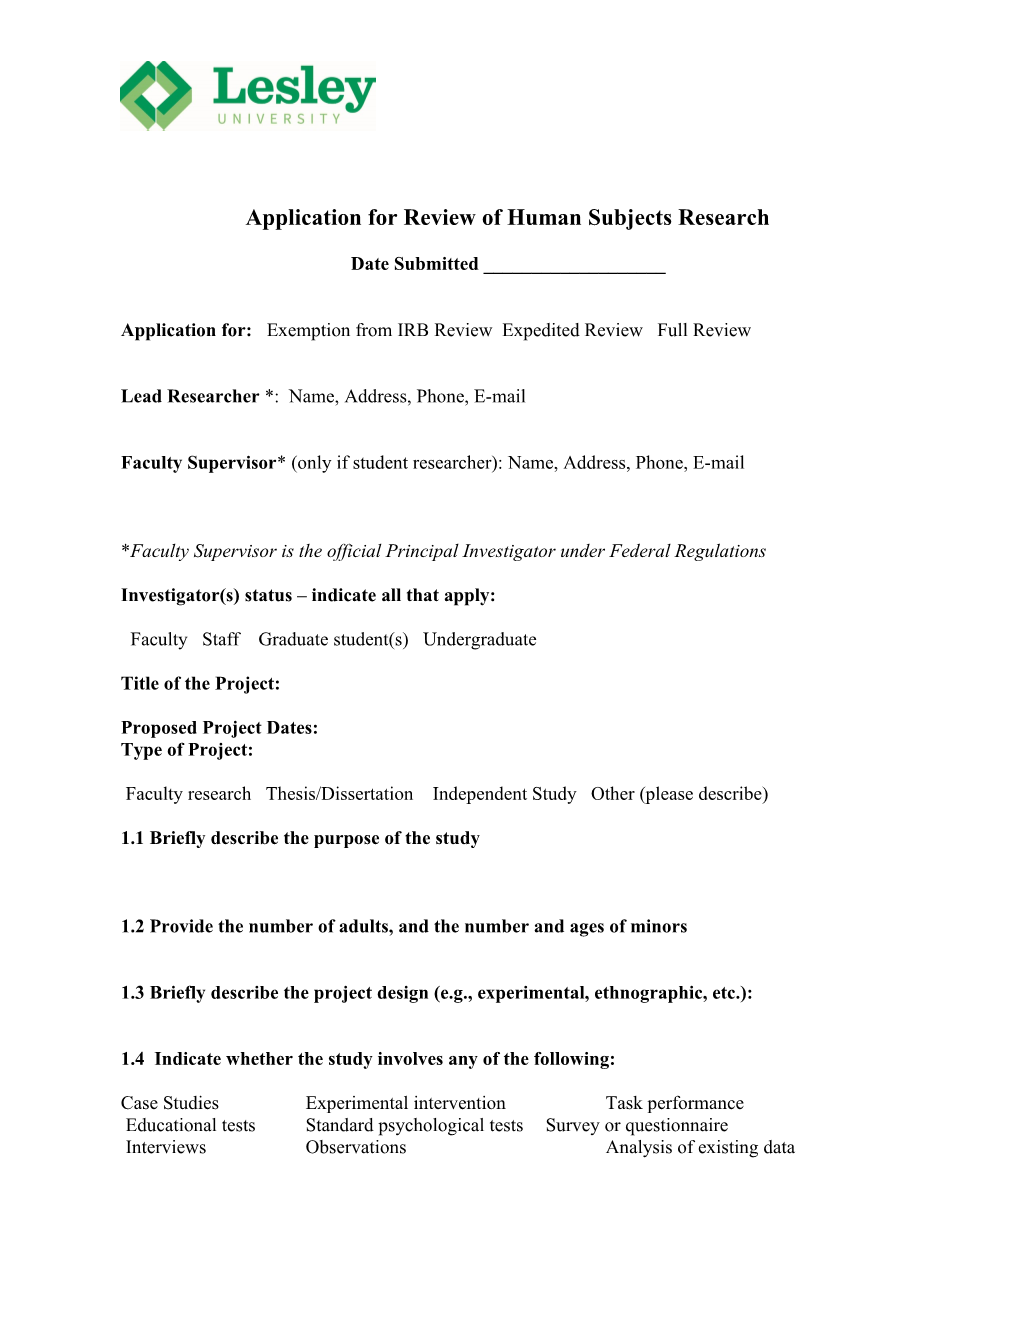 Application for Review of Human Subjects Research